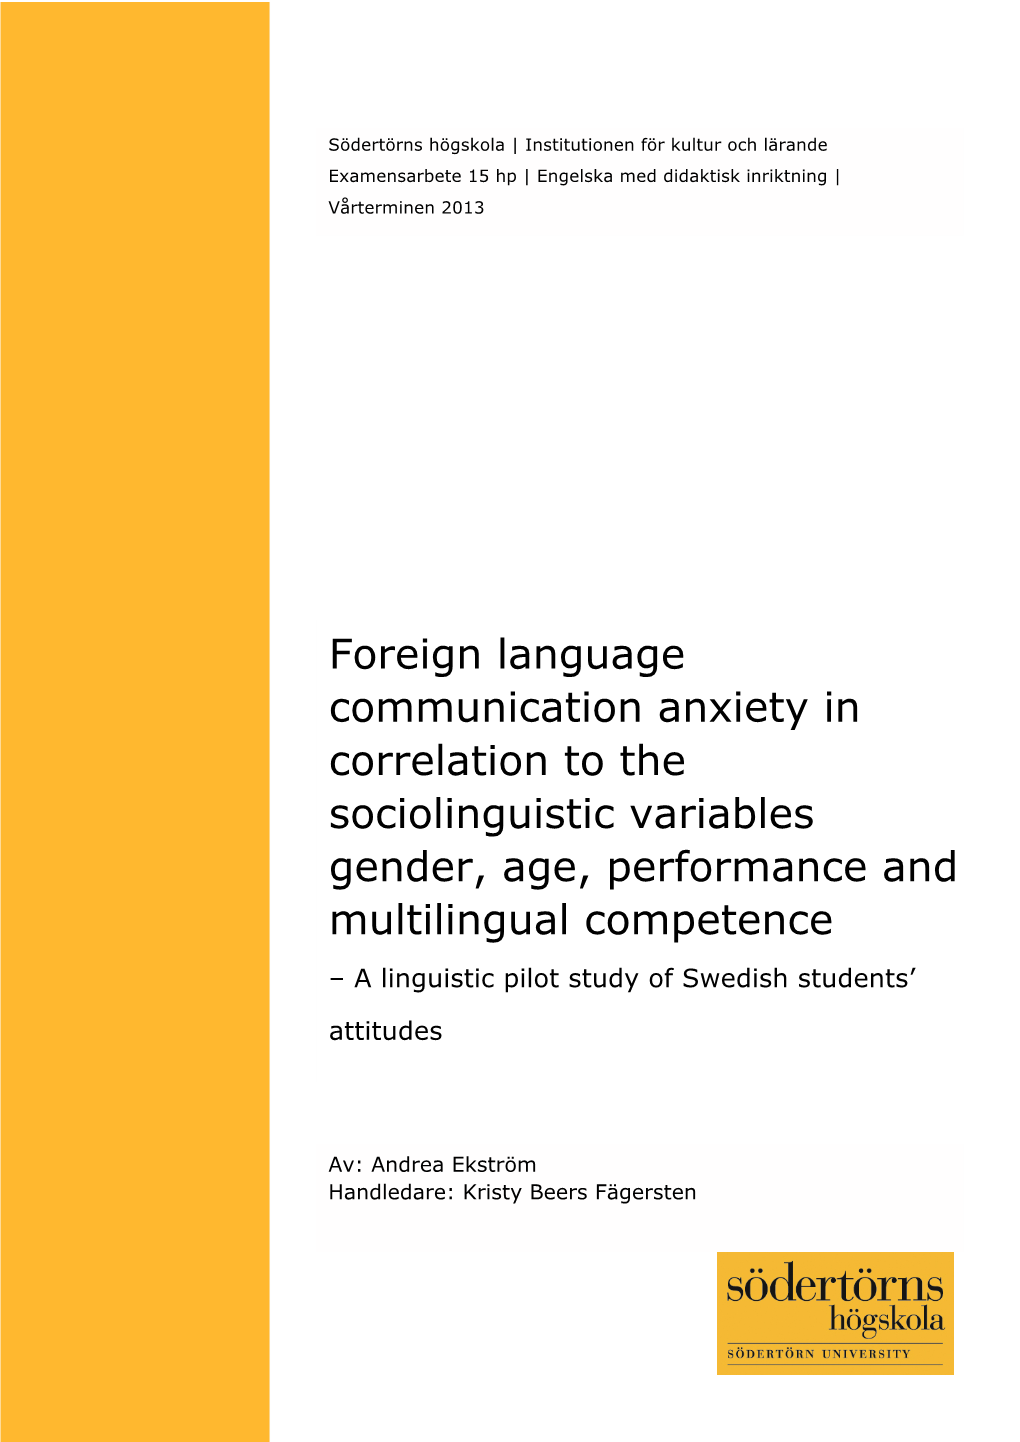 Foreign Language Communication Anxiety in Correlation to The